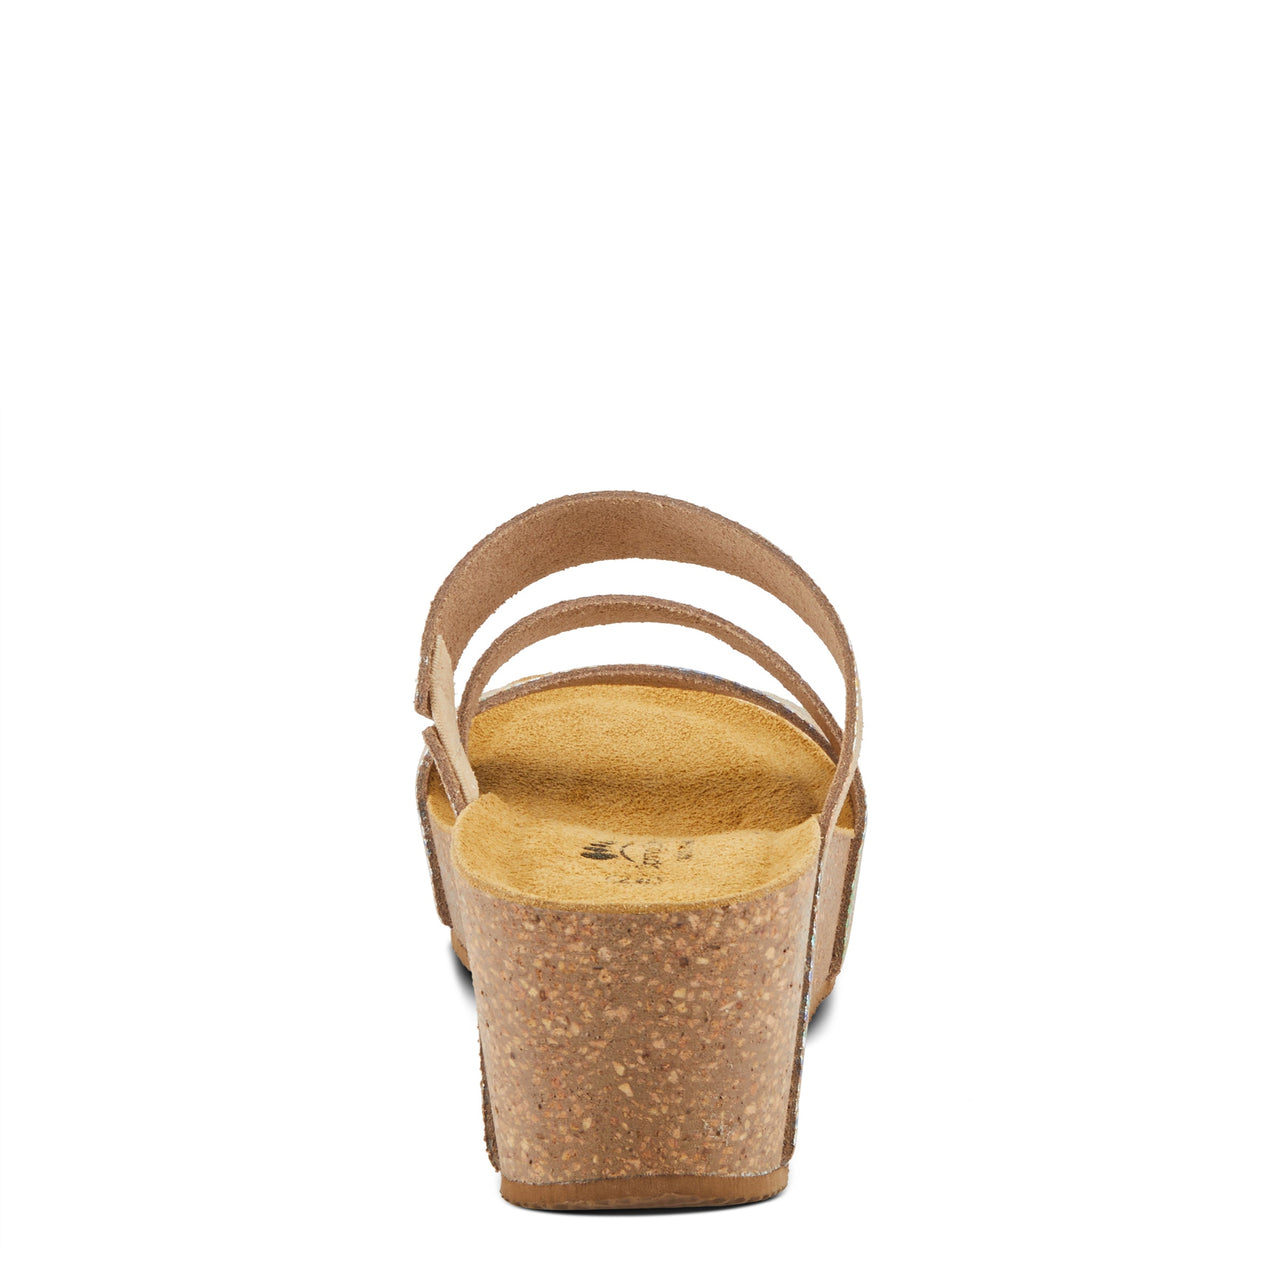  Women's Spring Step Butterpea Sandals featuring soft leather lining and padded footbed